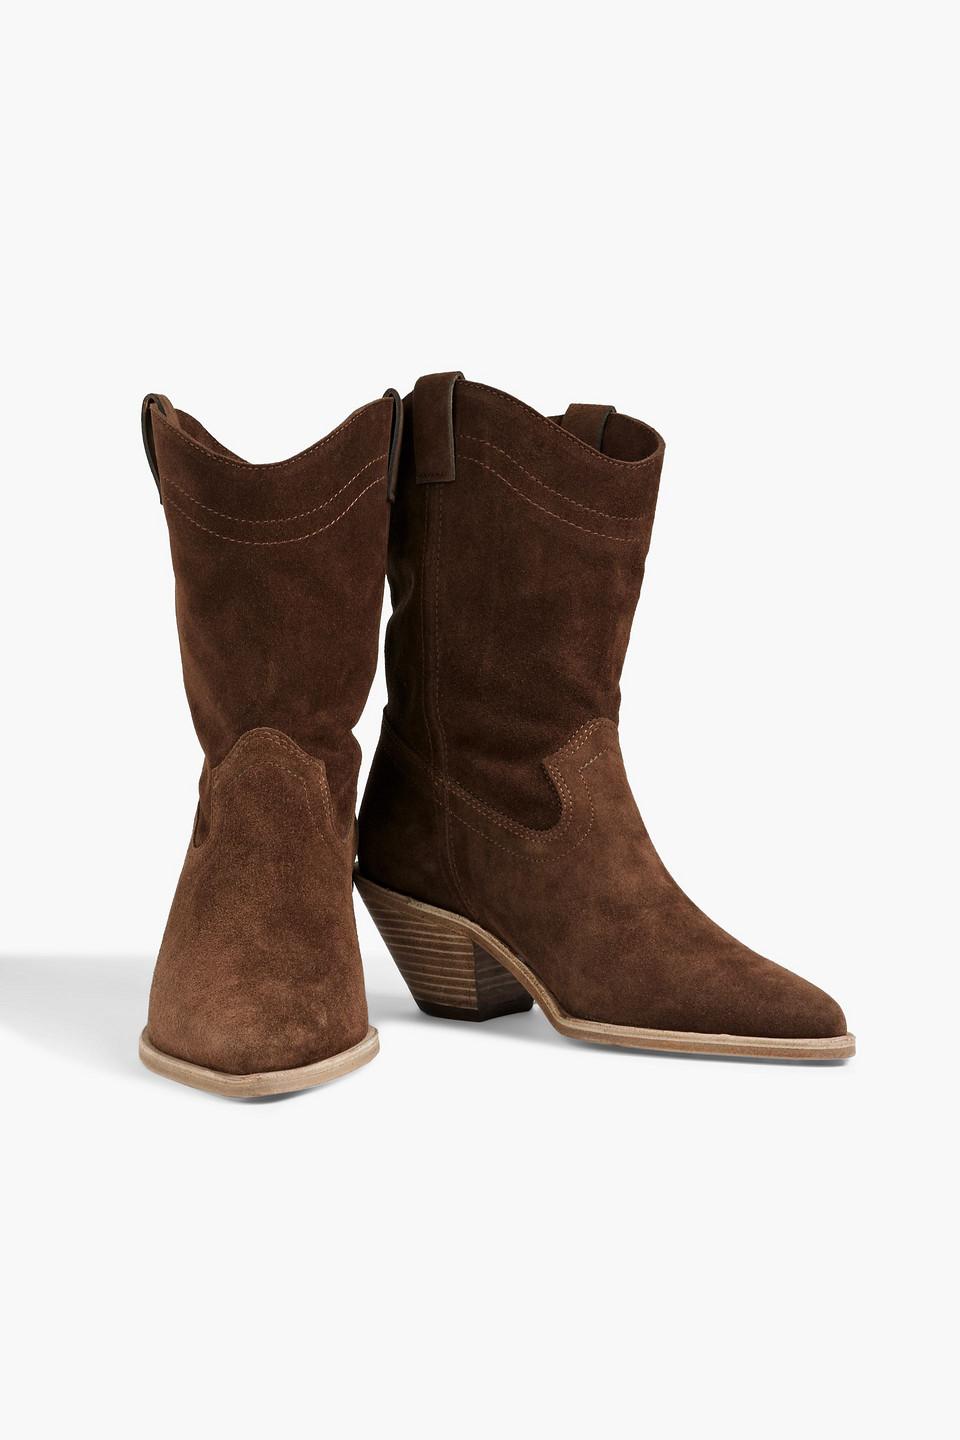 Ba&sh Claudia Suede Ankle Boots in Brown | Lyst